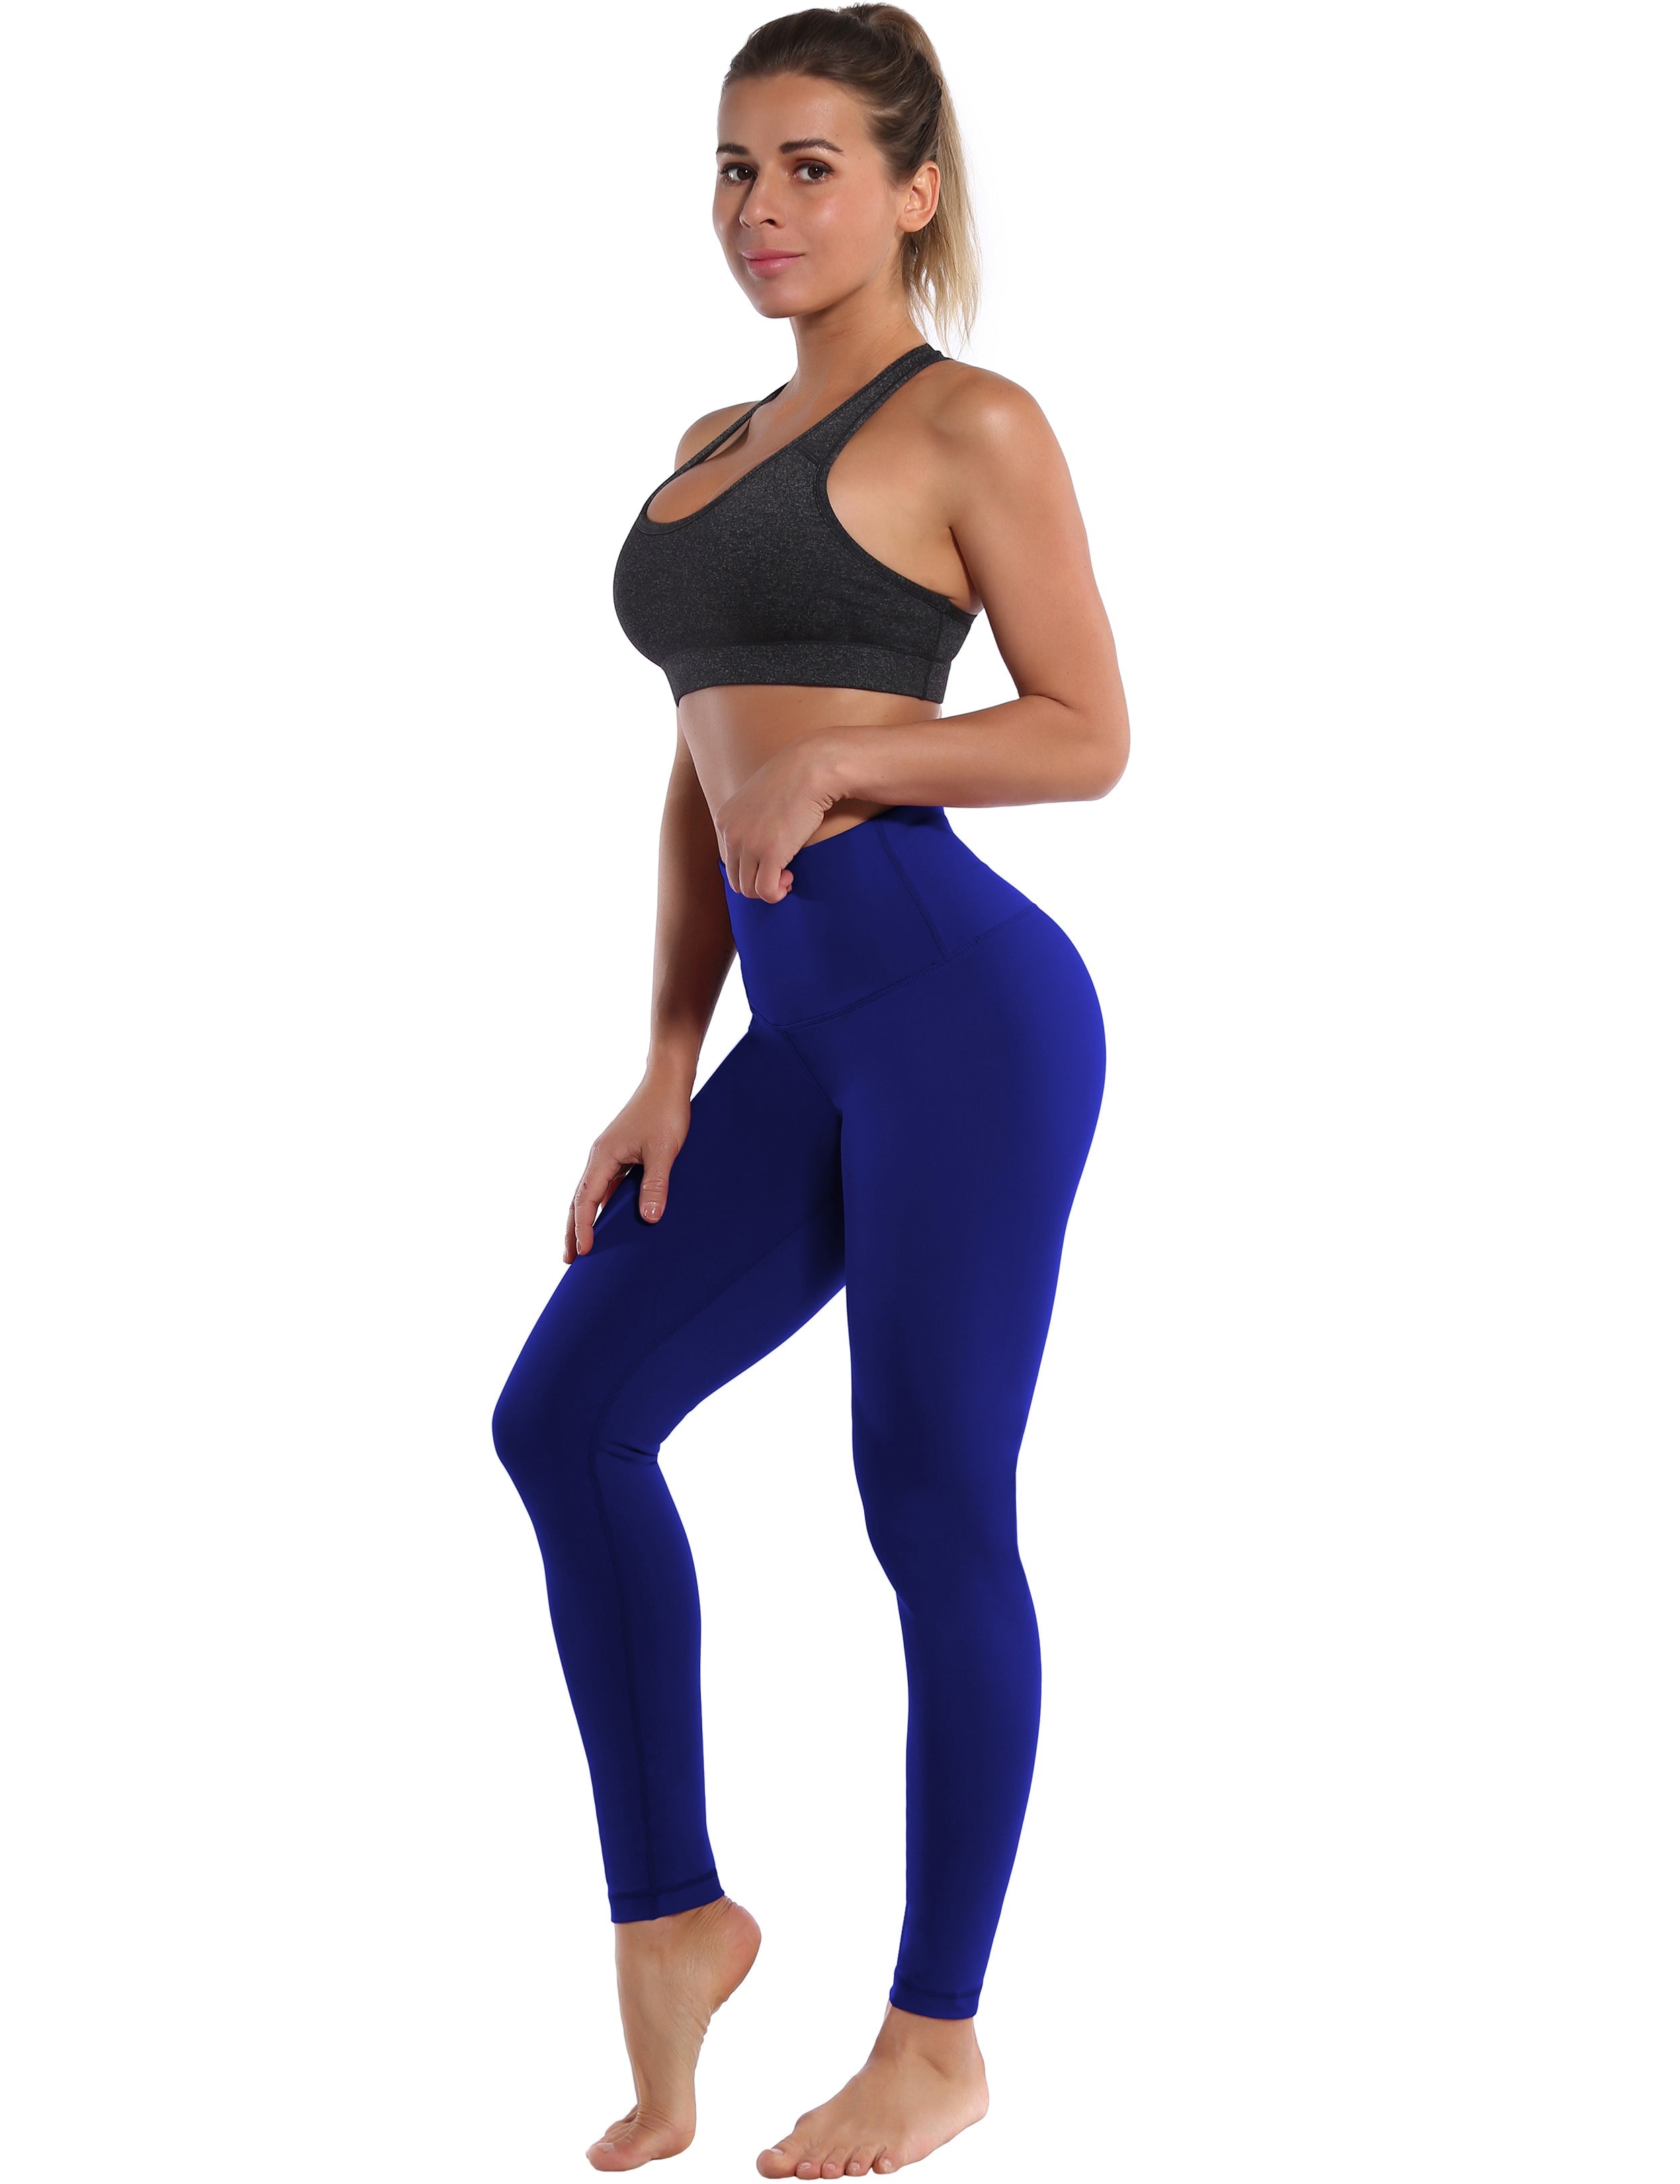 High Waist Jogging Pants navy 75%Nylon/25%Spandex Fabric doesn't attract lint easily 4-way stretch No see-through Moisture-wicking Tummy control Inner pocket Four lengths